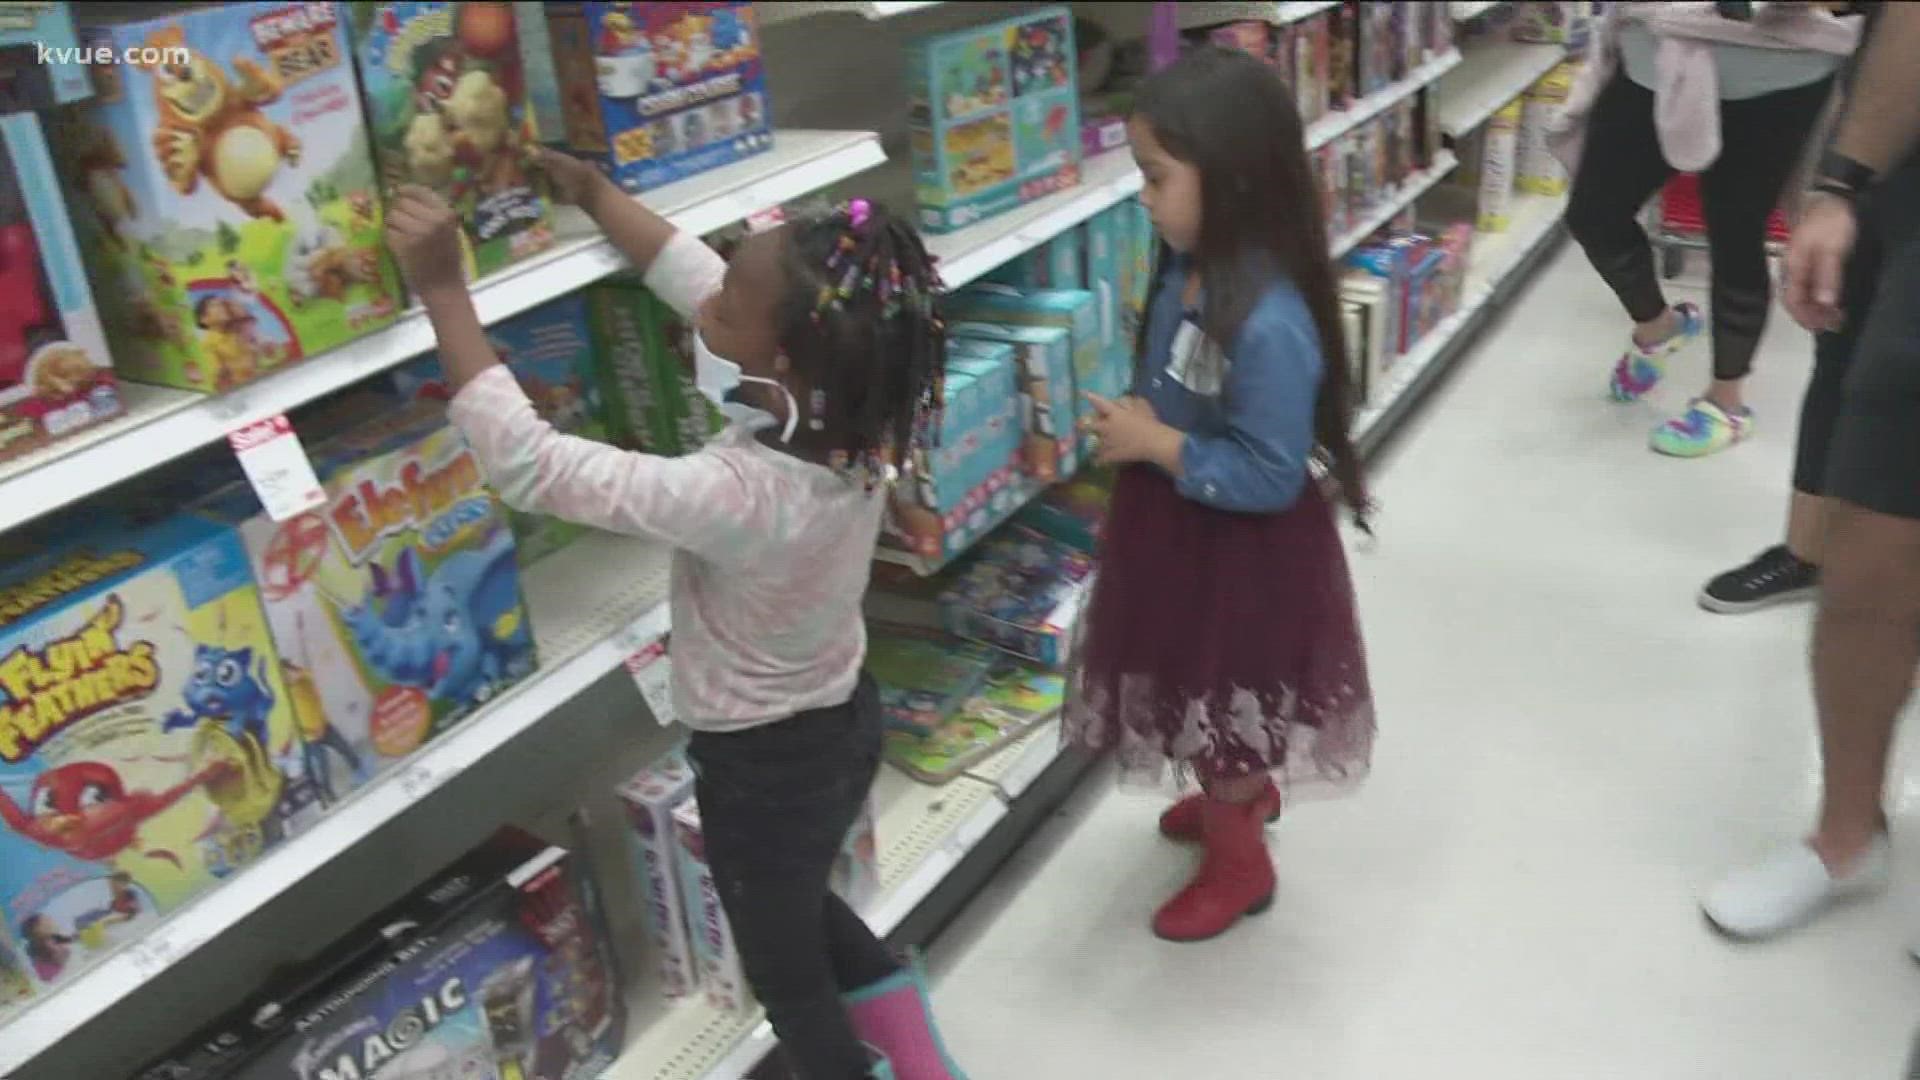 Some pro football players gave Central Texas kids a special treat.